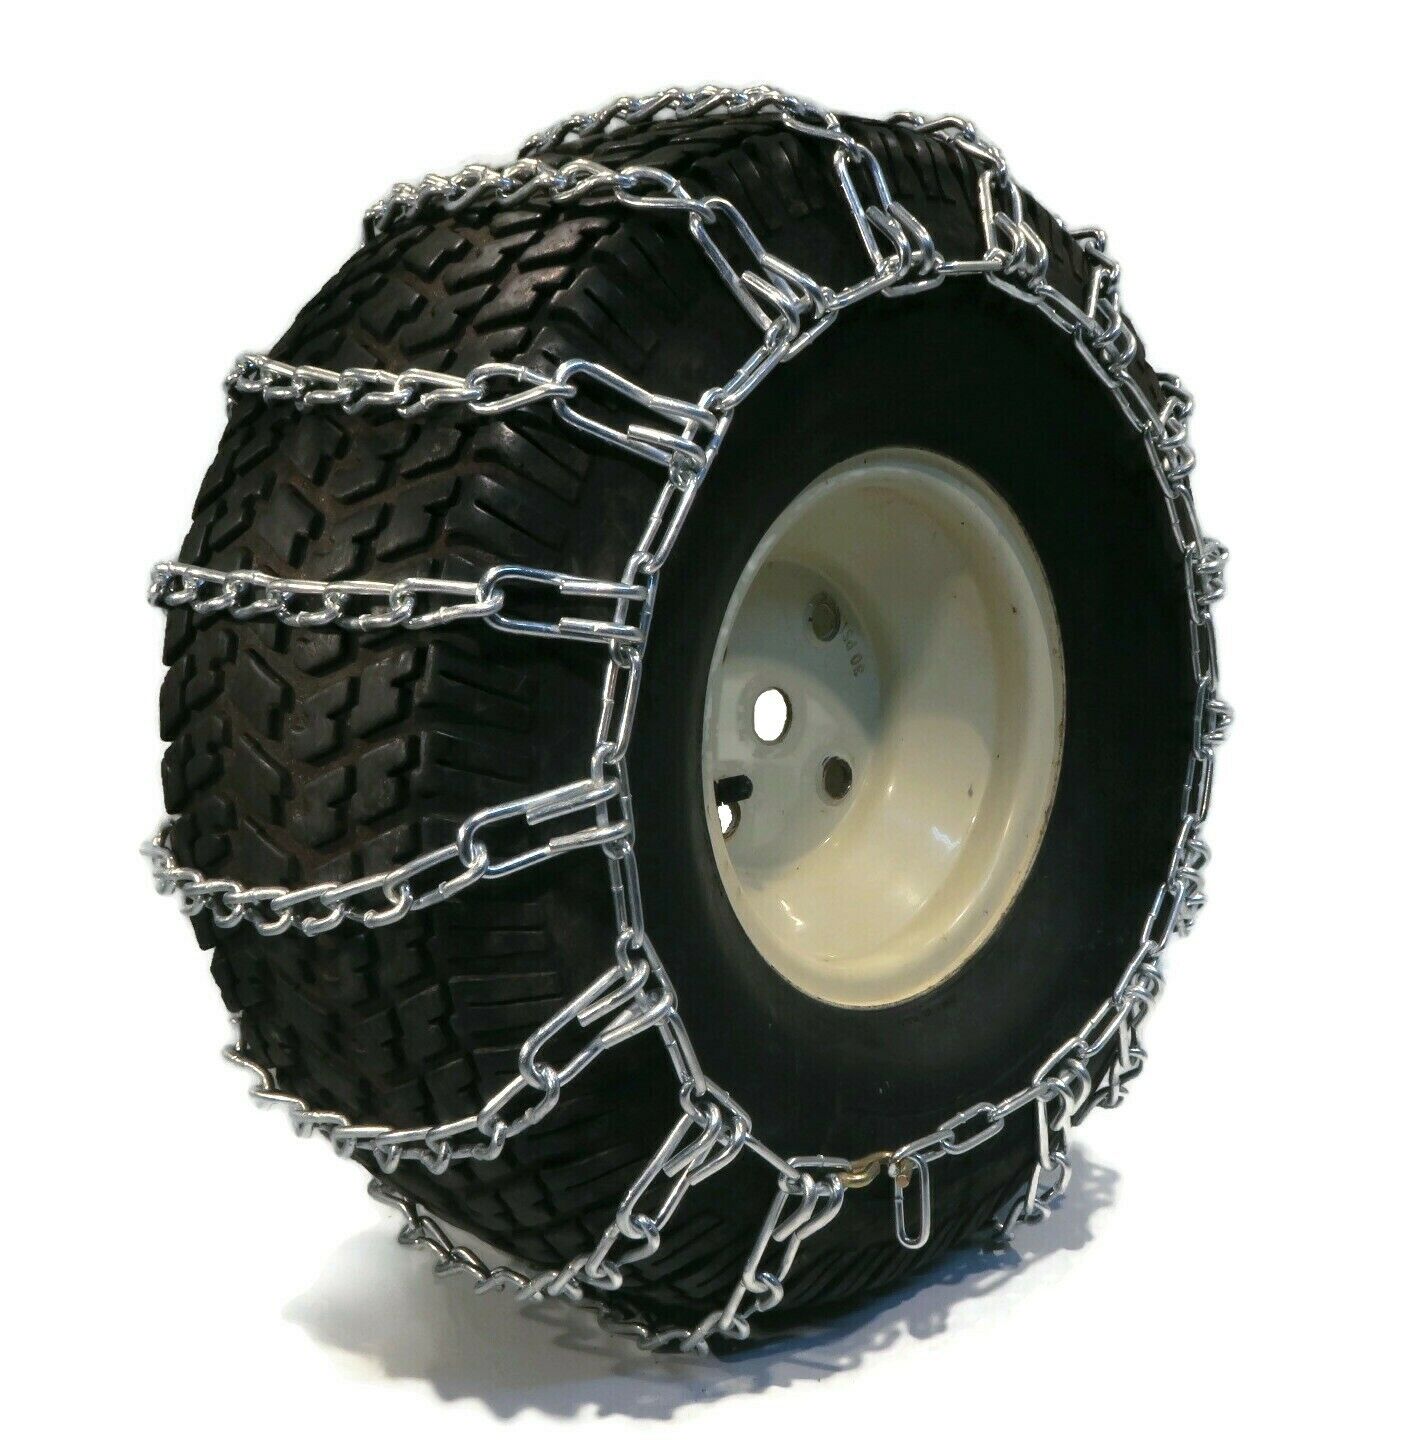 The ROP Shop | 26x12-12 Tire Chains 2 Link John Deere 400 & X Series Lawn Mower Tractor Rider - image 3 of 6